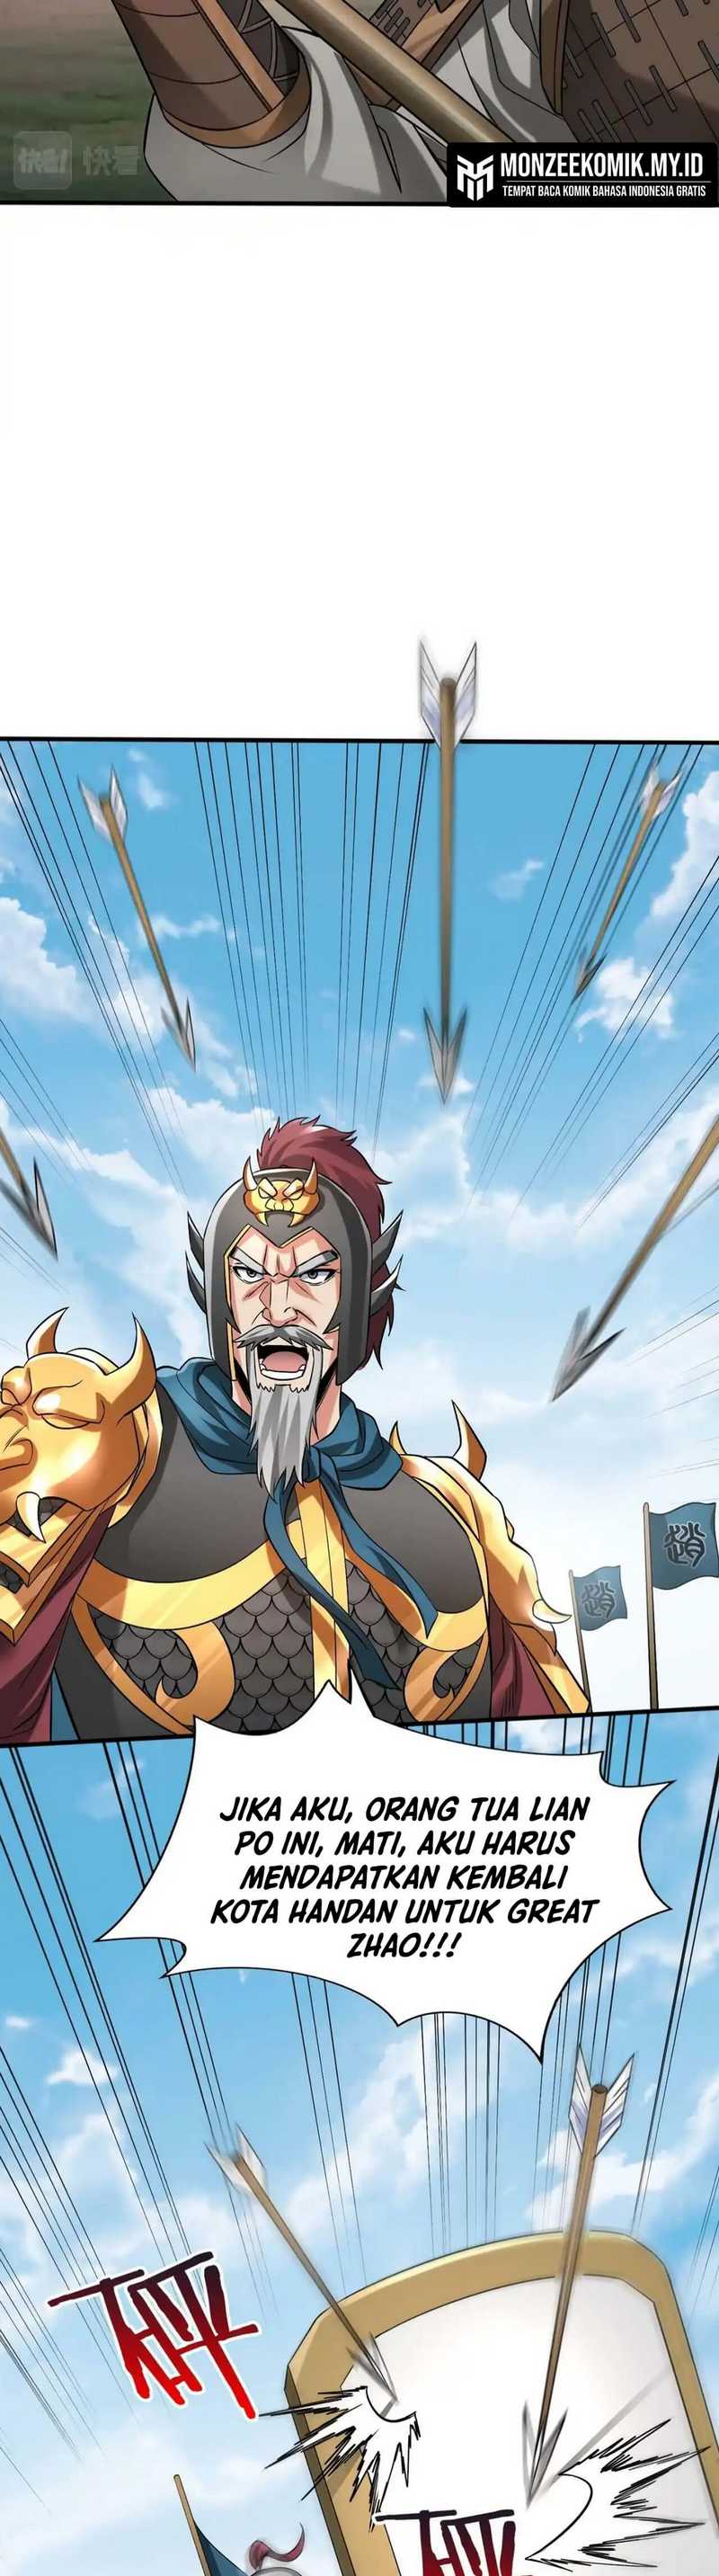 The Son of the First Emperor Kills Enemies and Becomes a God Chapter 45